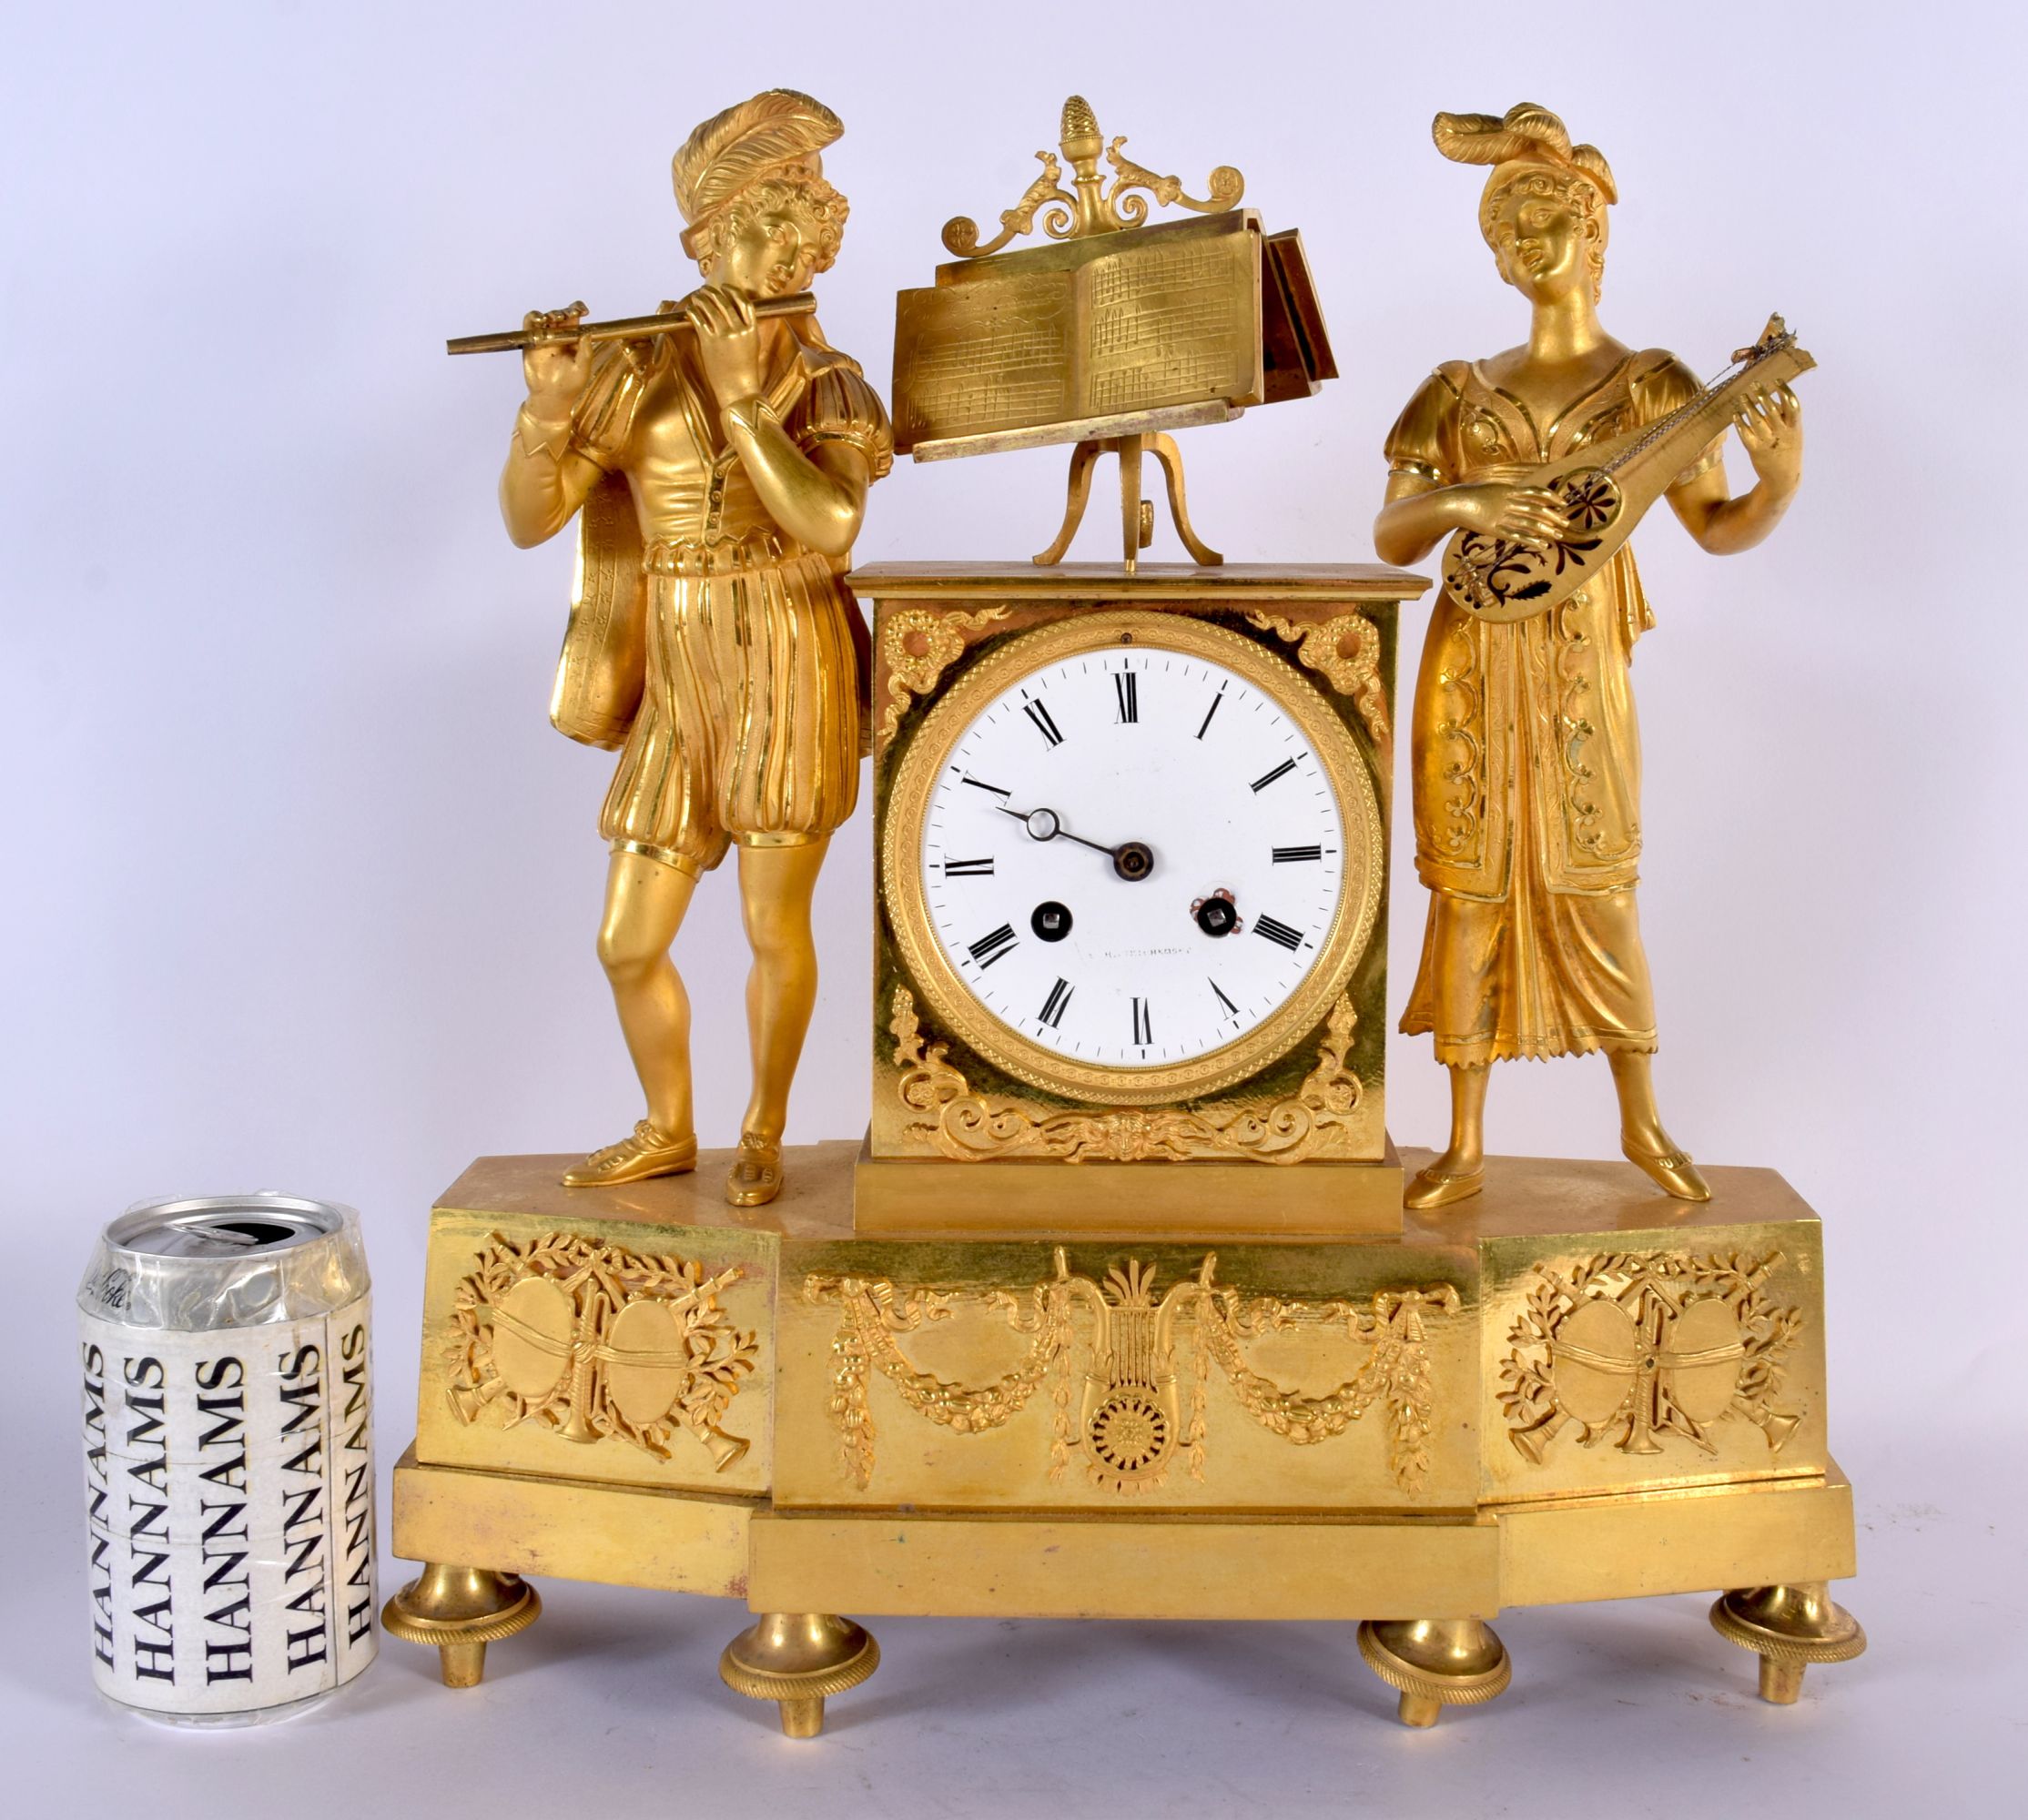 A LARGE EARLY 19TH CENTURY FRENCH GILT BRONZE EMPIRE MANTEL CLOCK formed as a figure and a female pl